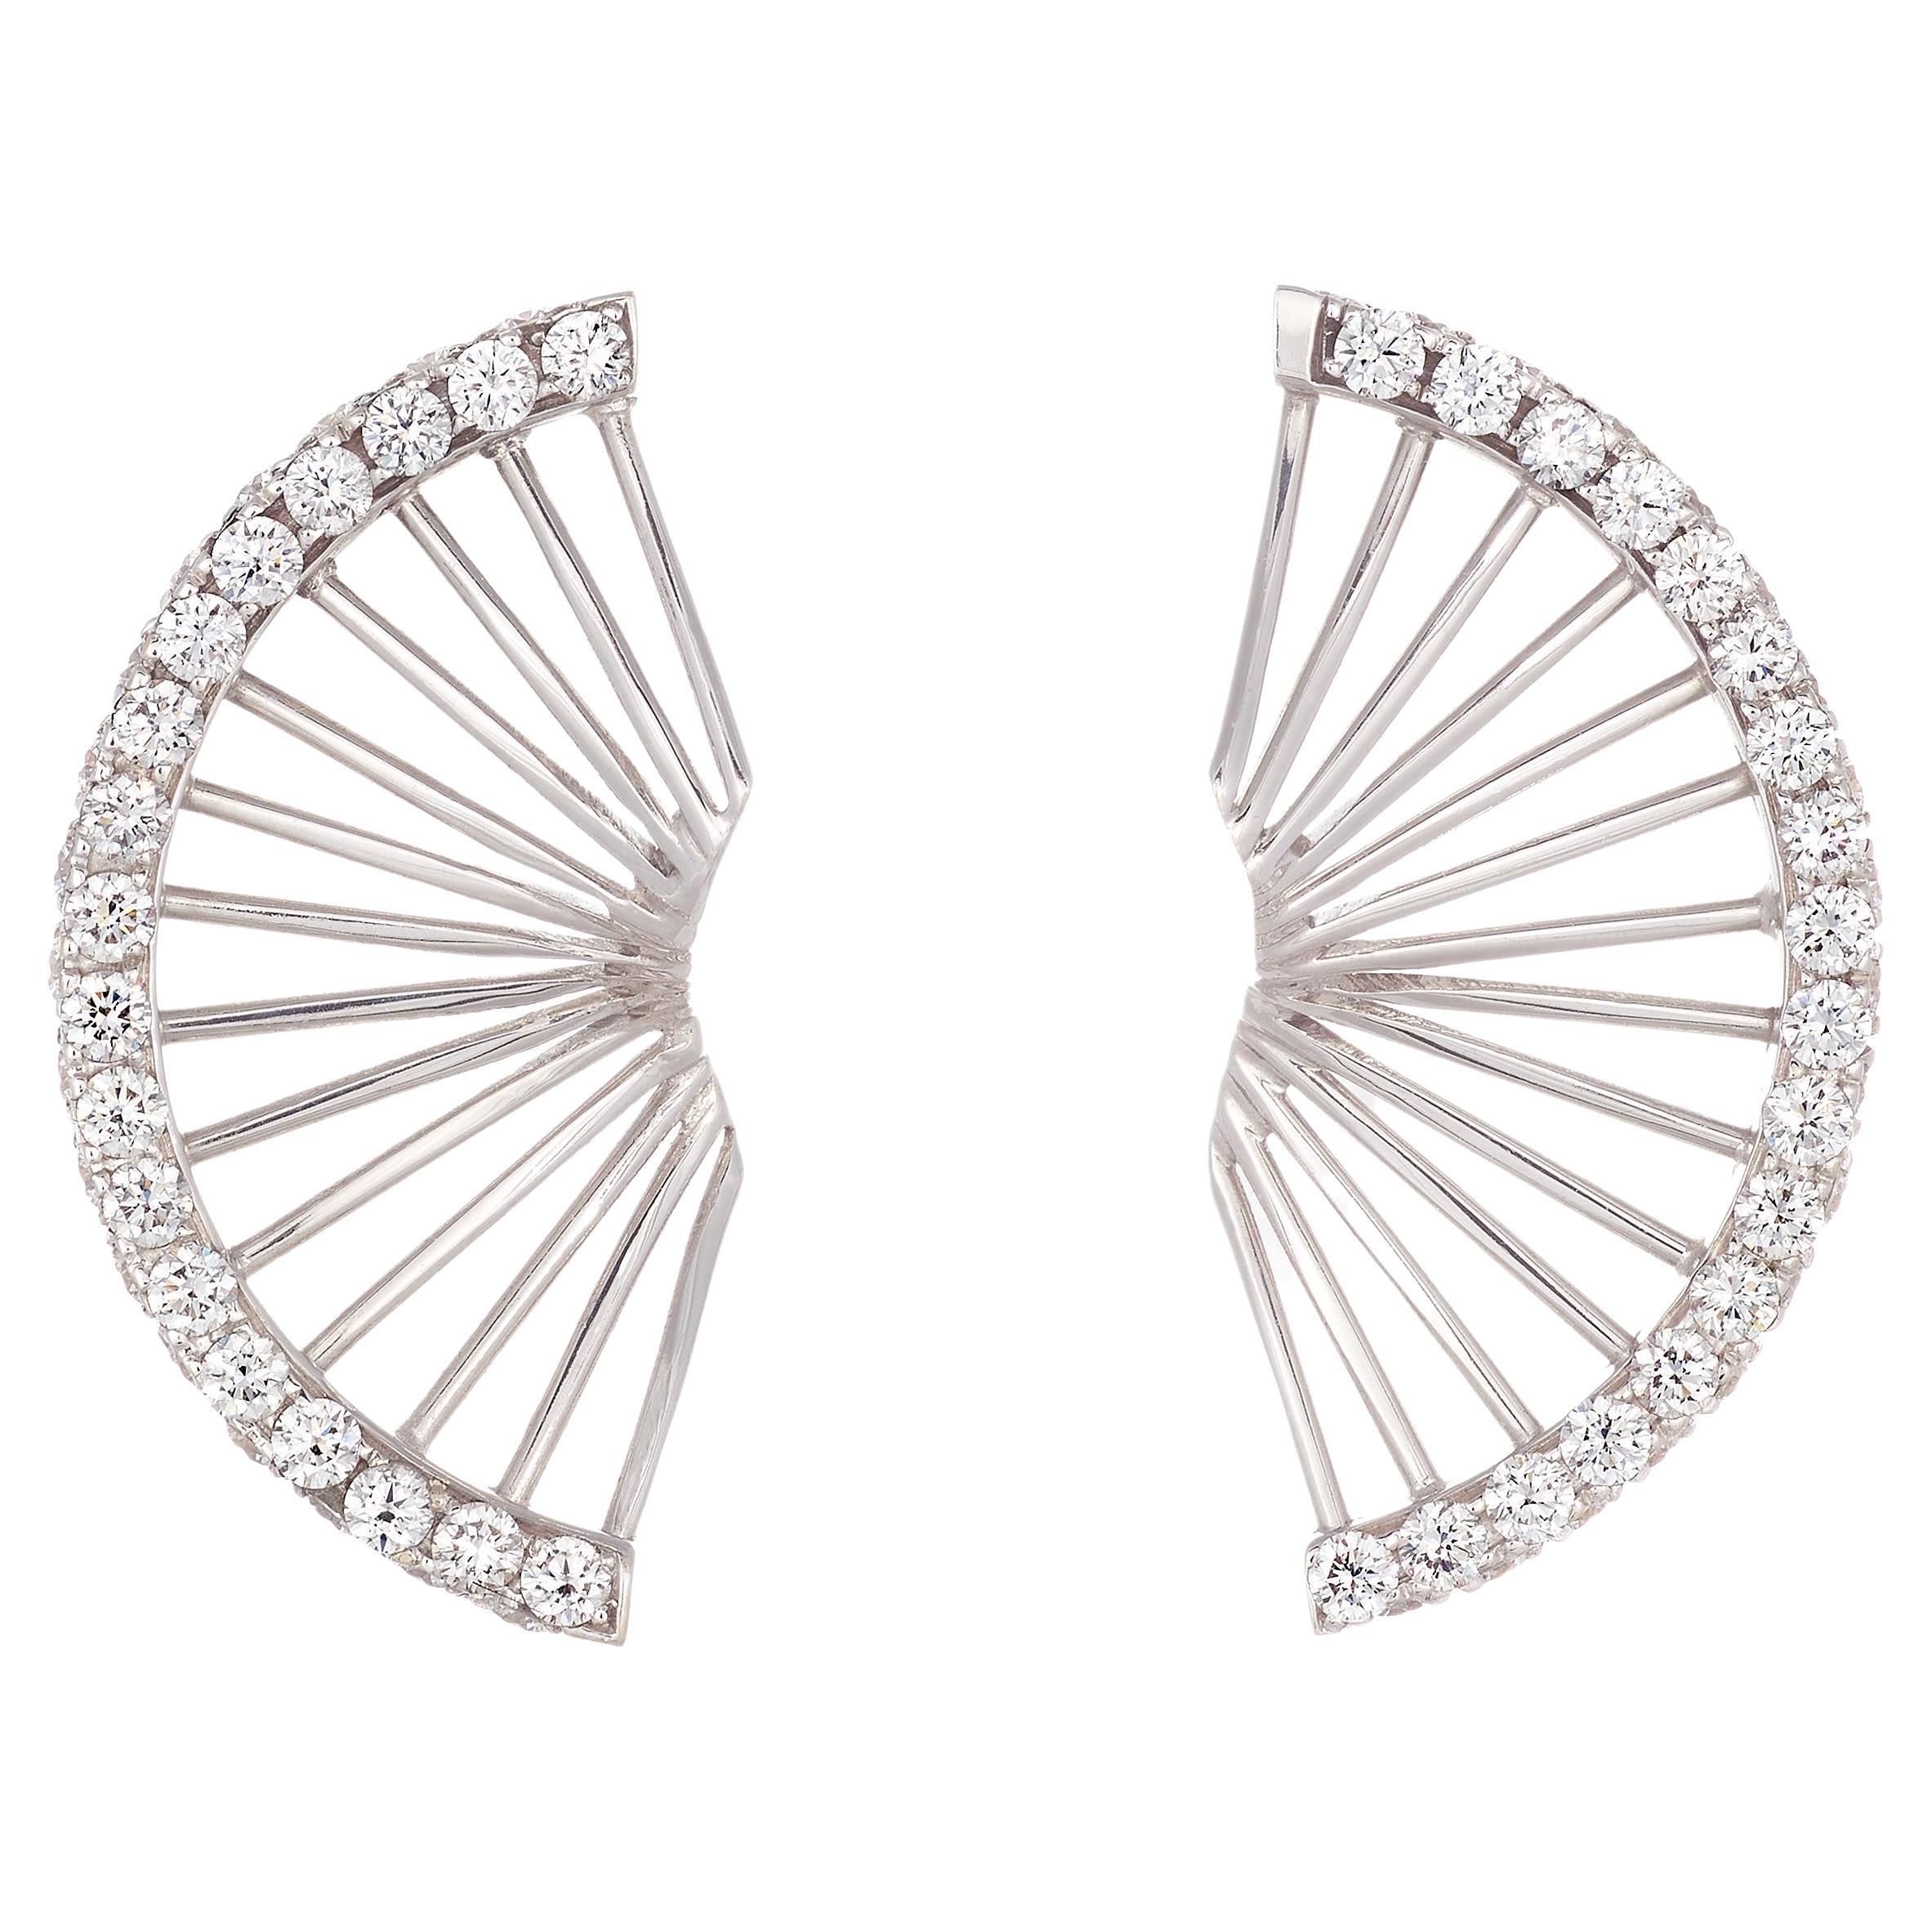 Rosior Contemporary Drop Earrings Set in White Gold with Diamonds For Sale